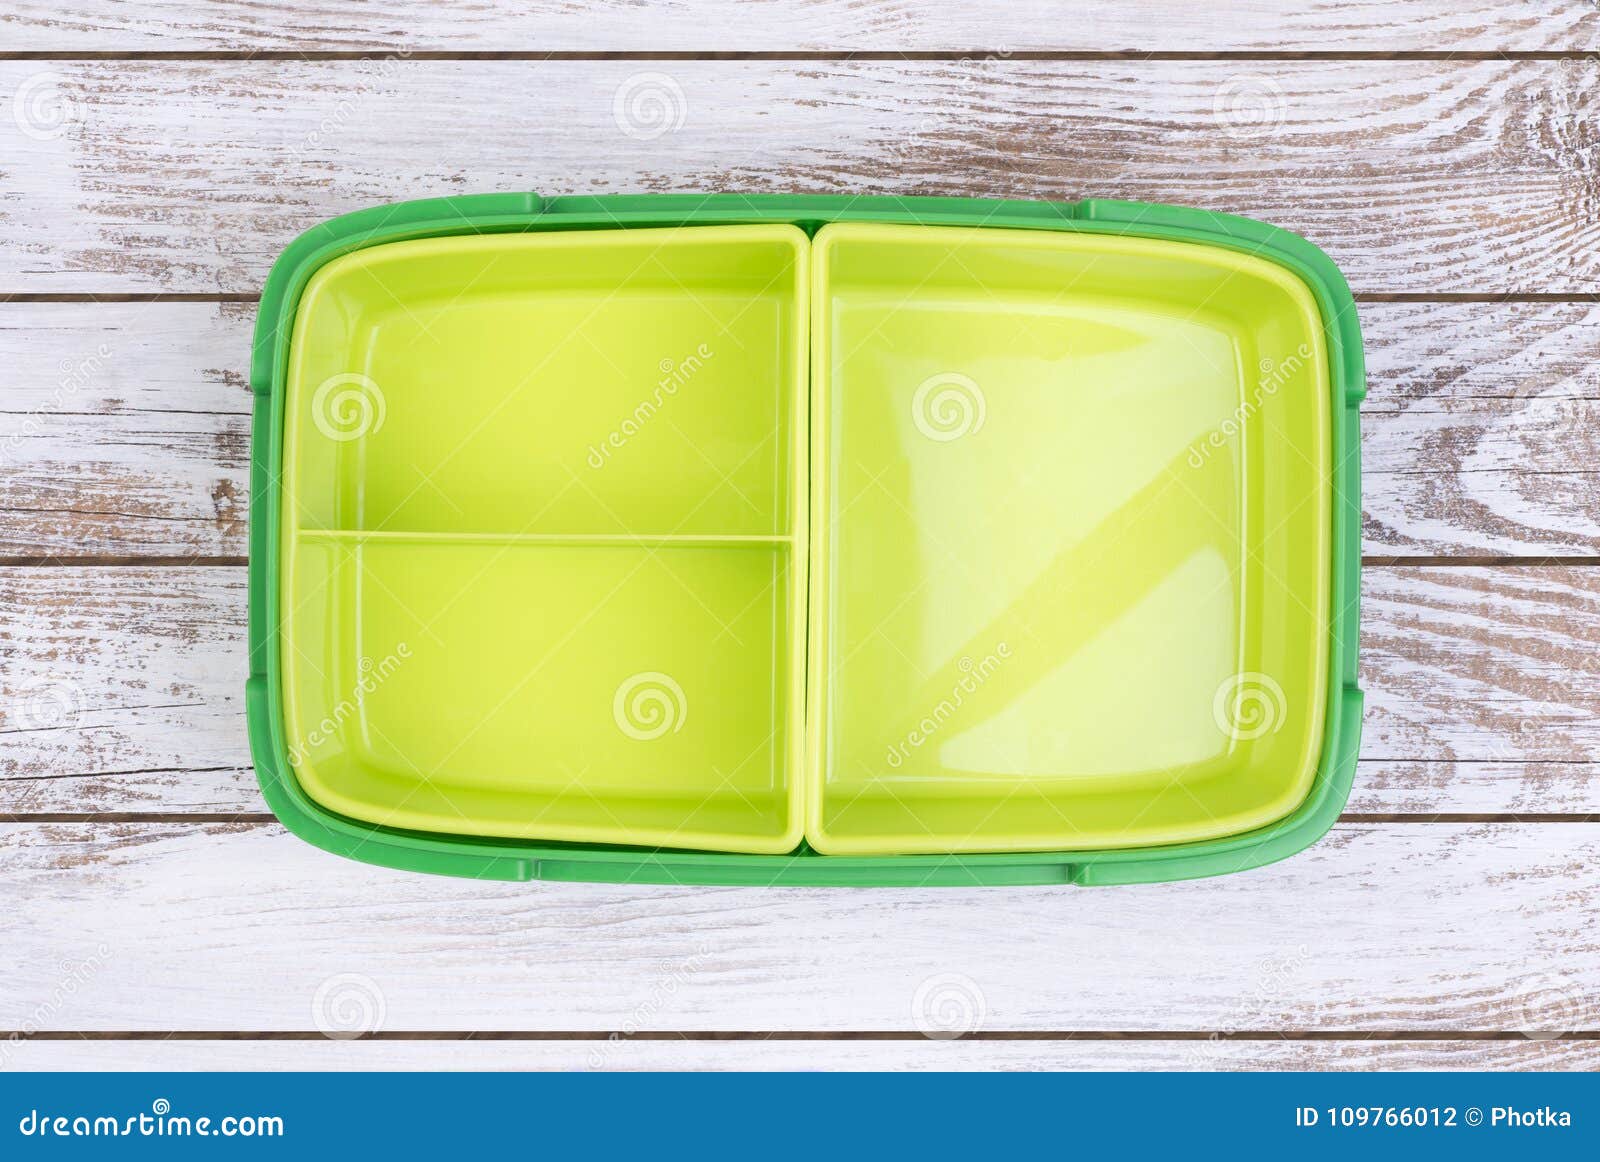 https://thumbs.dreamstime.com/z/empty-lunch-box-wooden-table-top-view-green-white-109766012.jpg